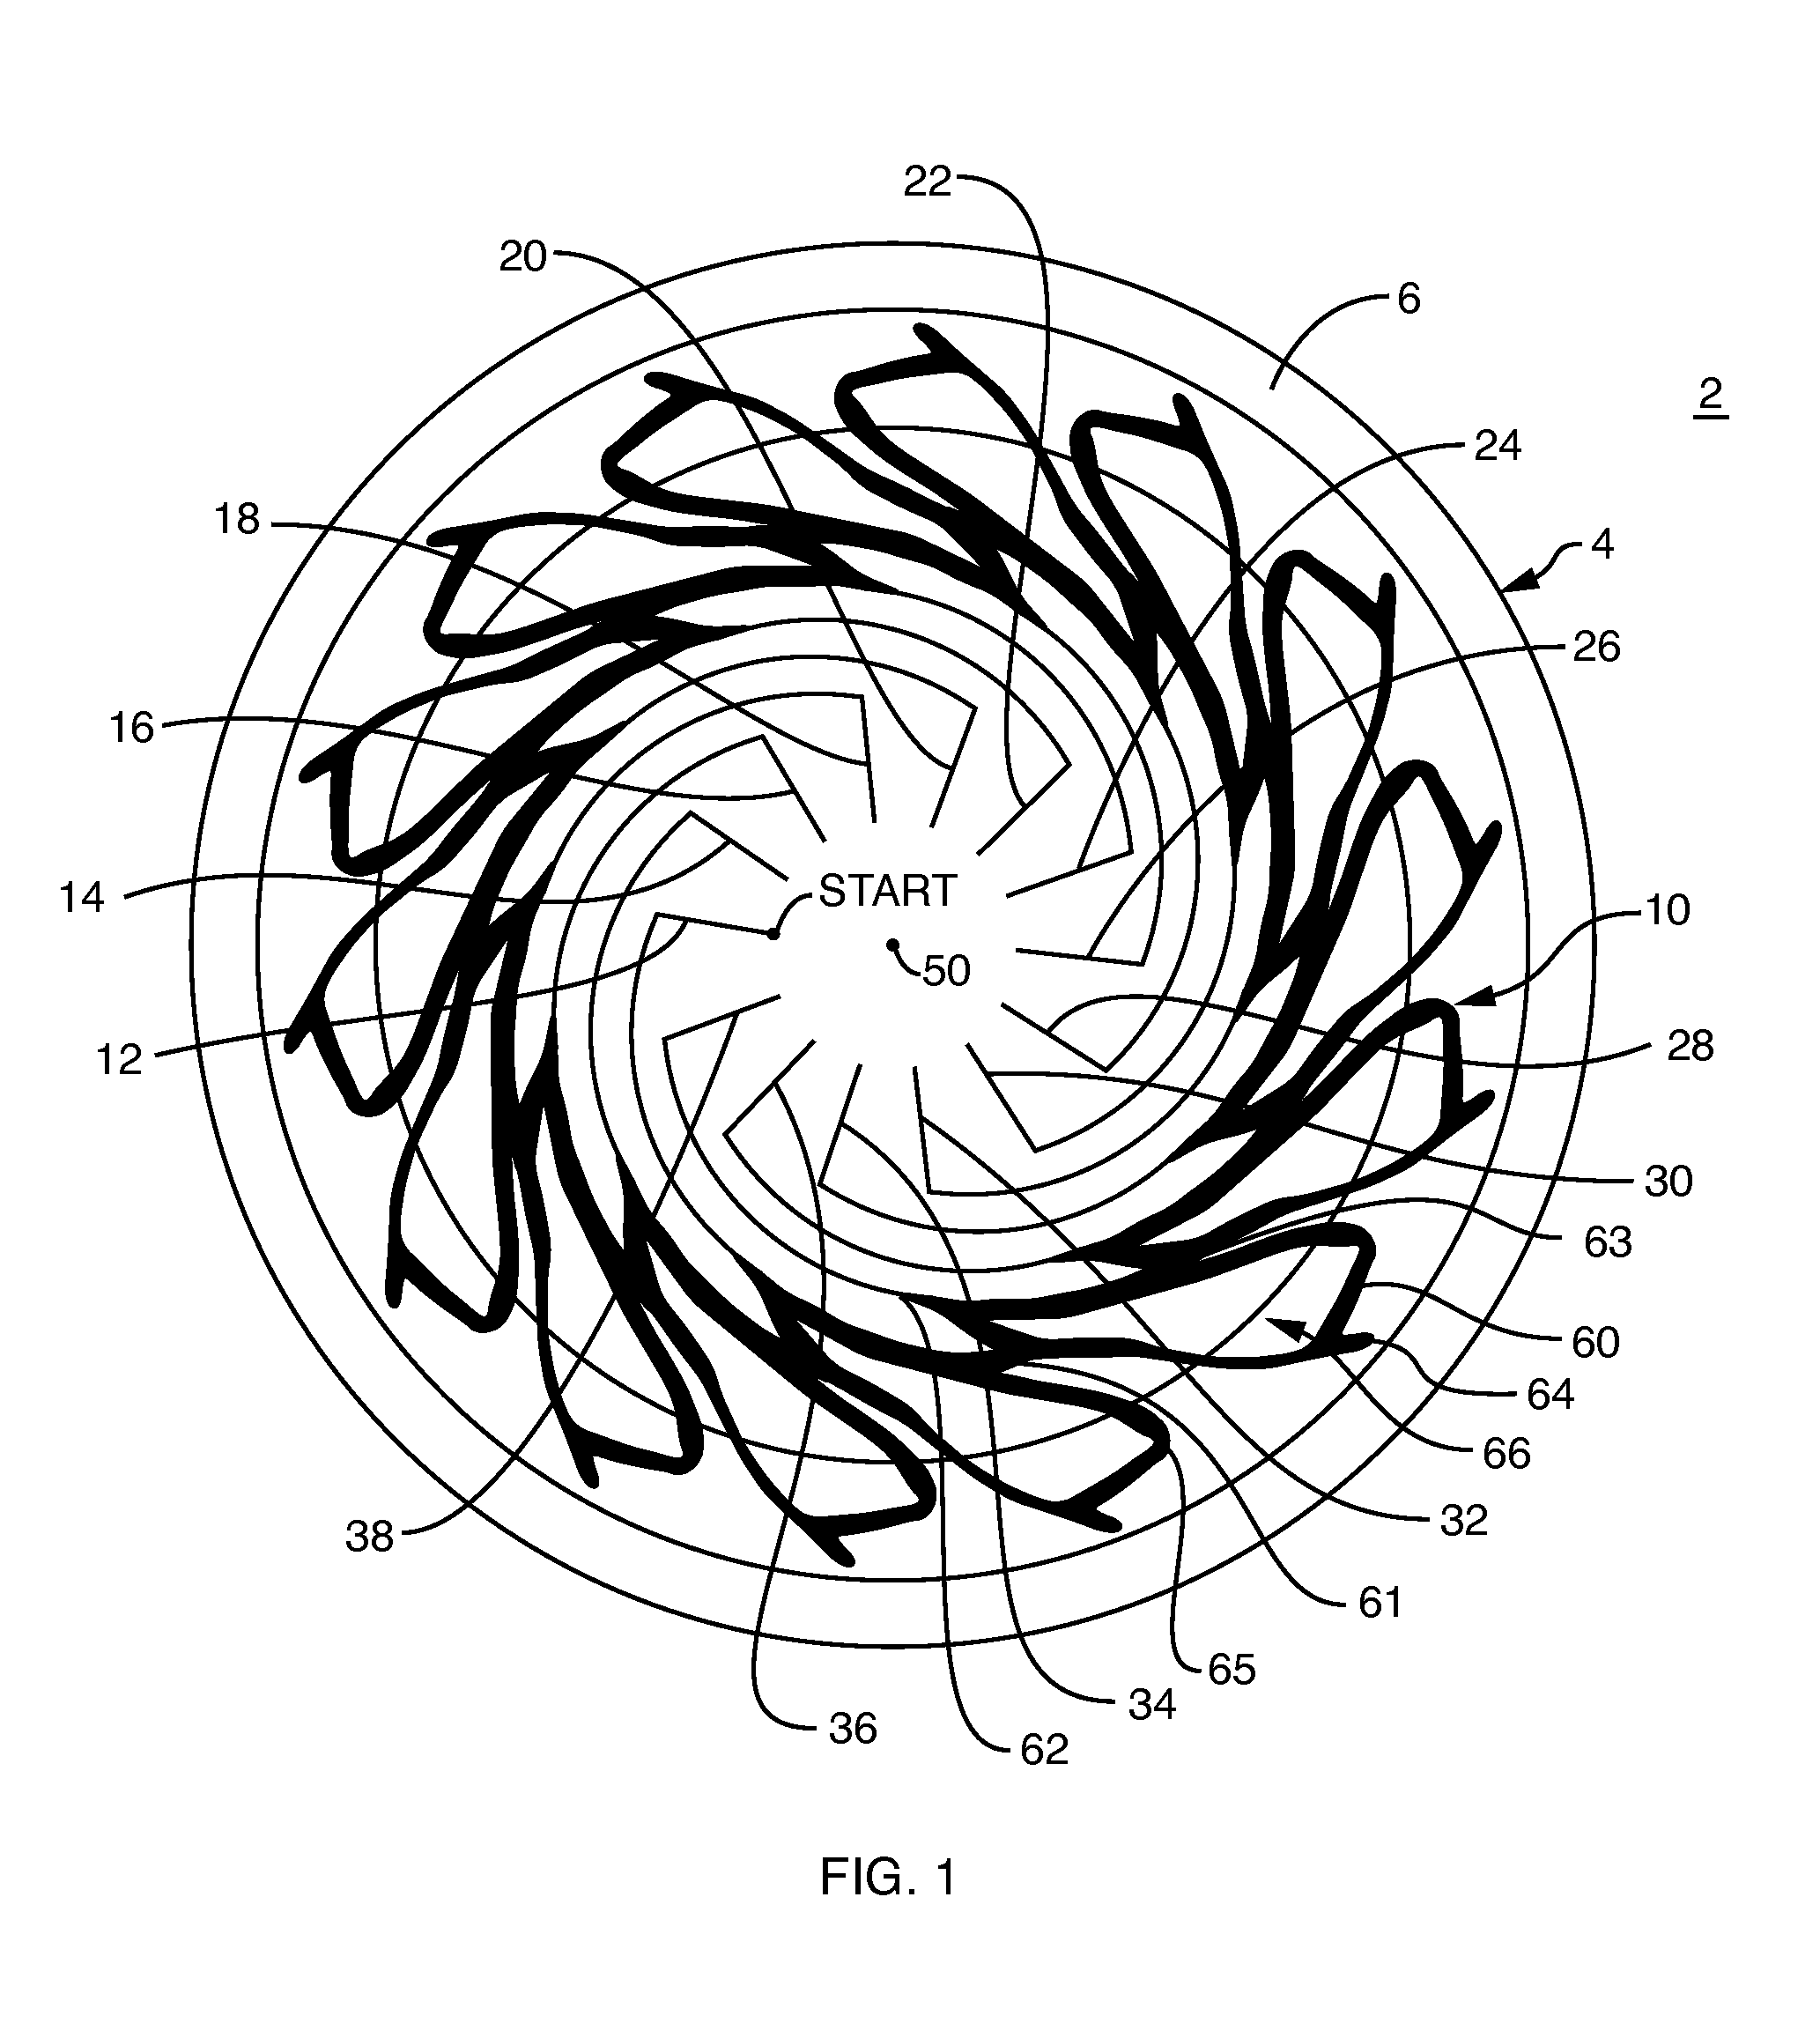 Leaky wave antenna with radiating structure including fractal loops